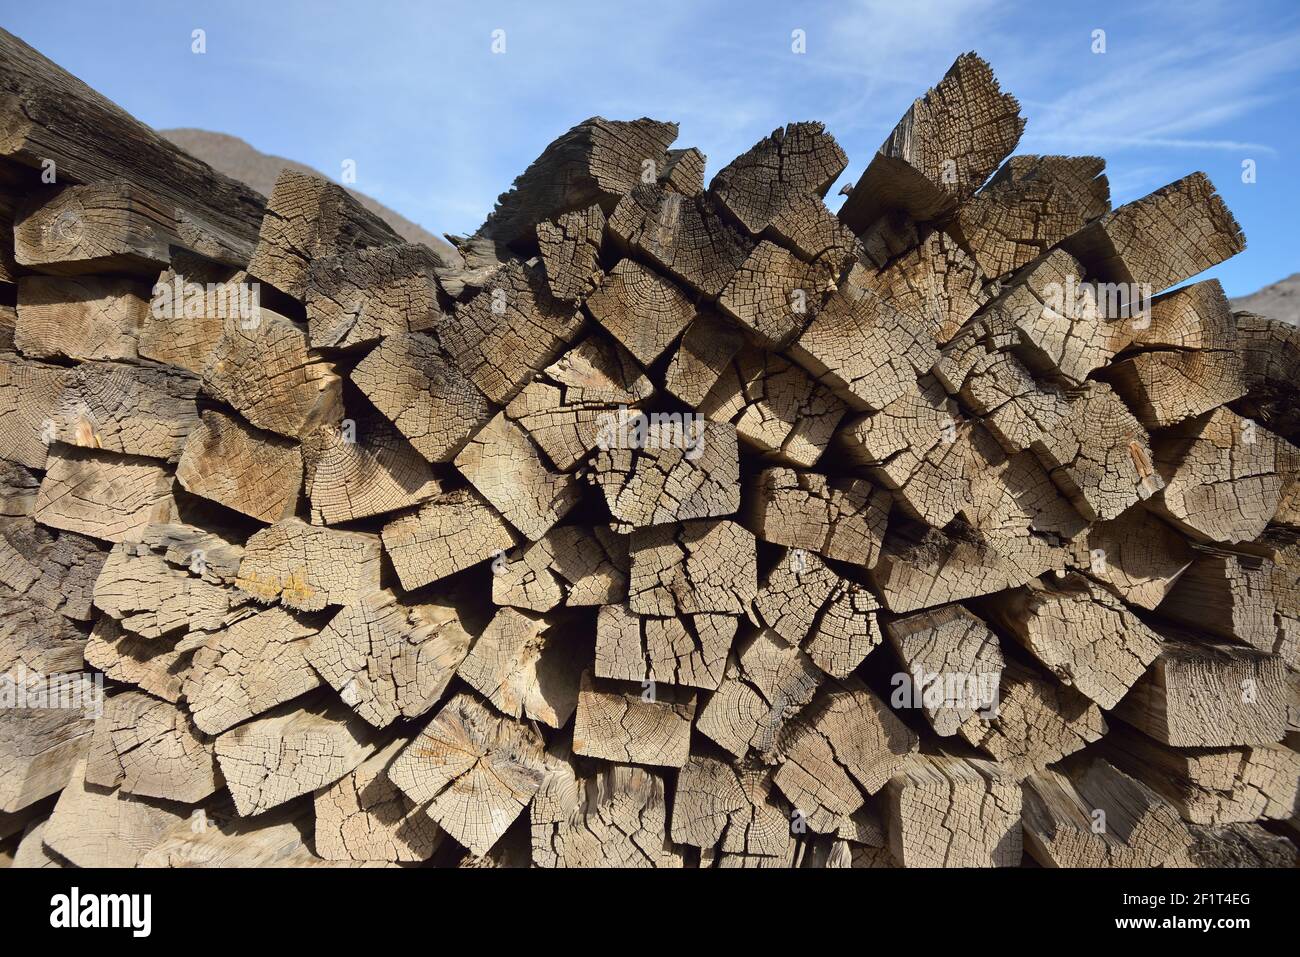 Old railway ties piled up at Scotty's Castle,  Death Valley, California Stock Photo